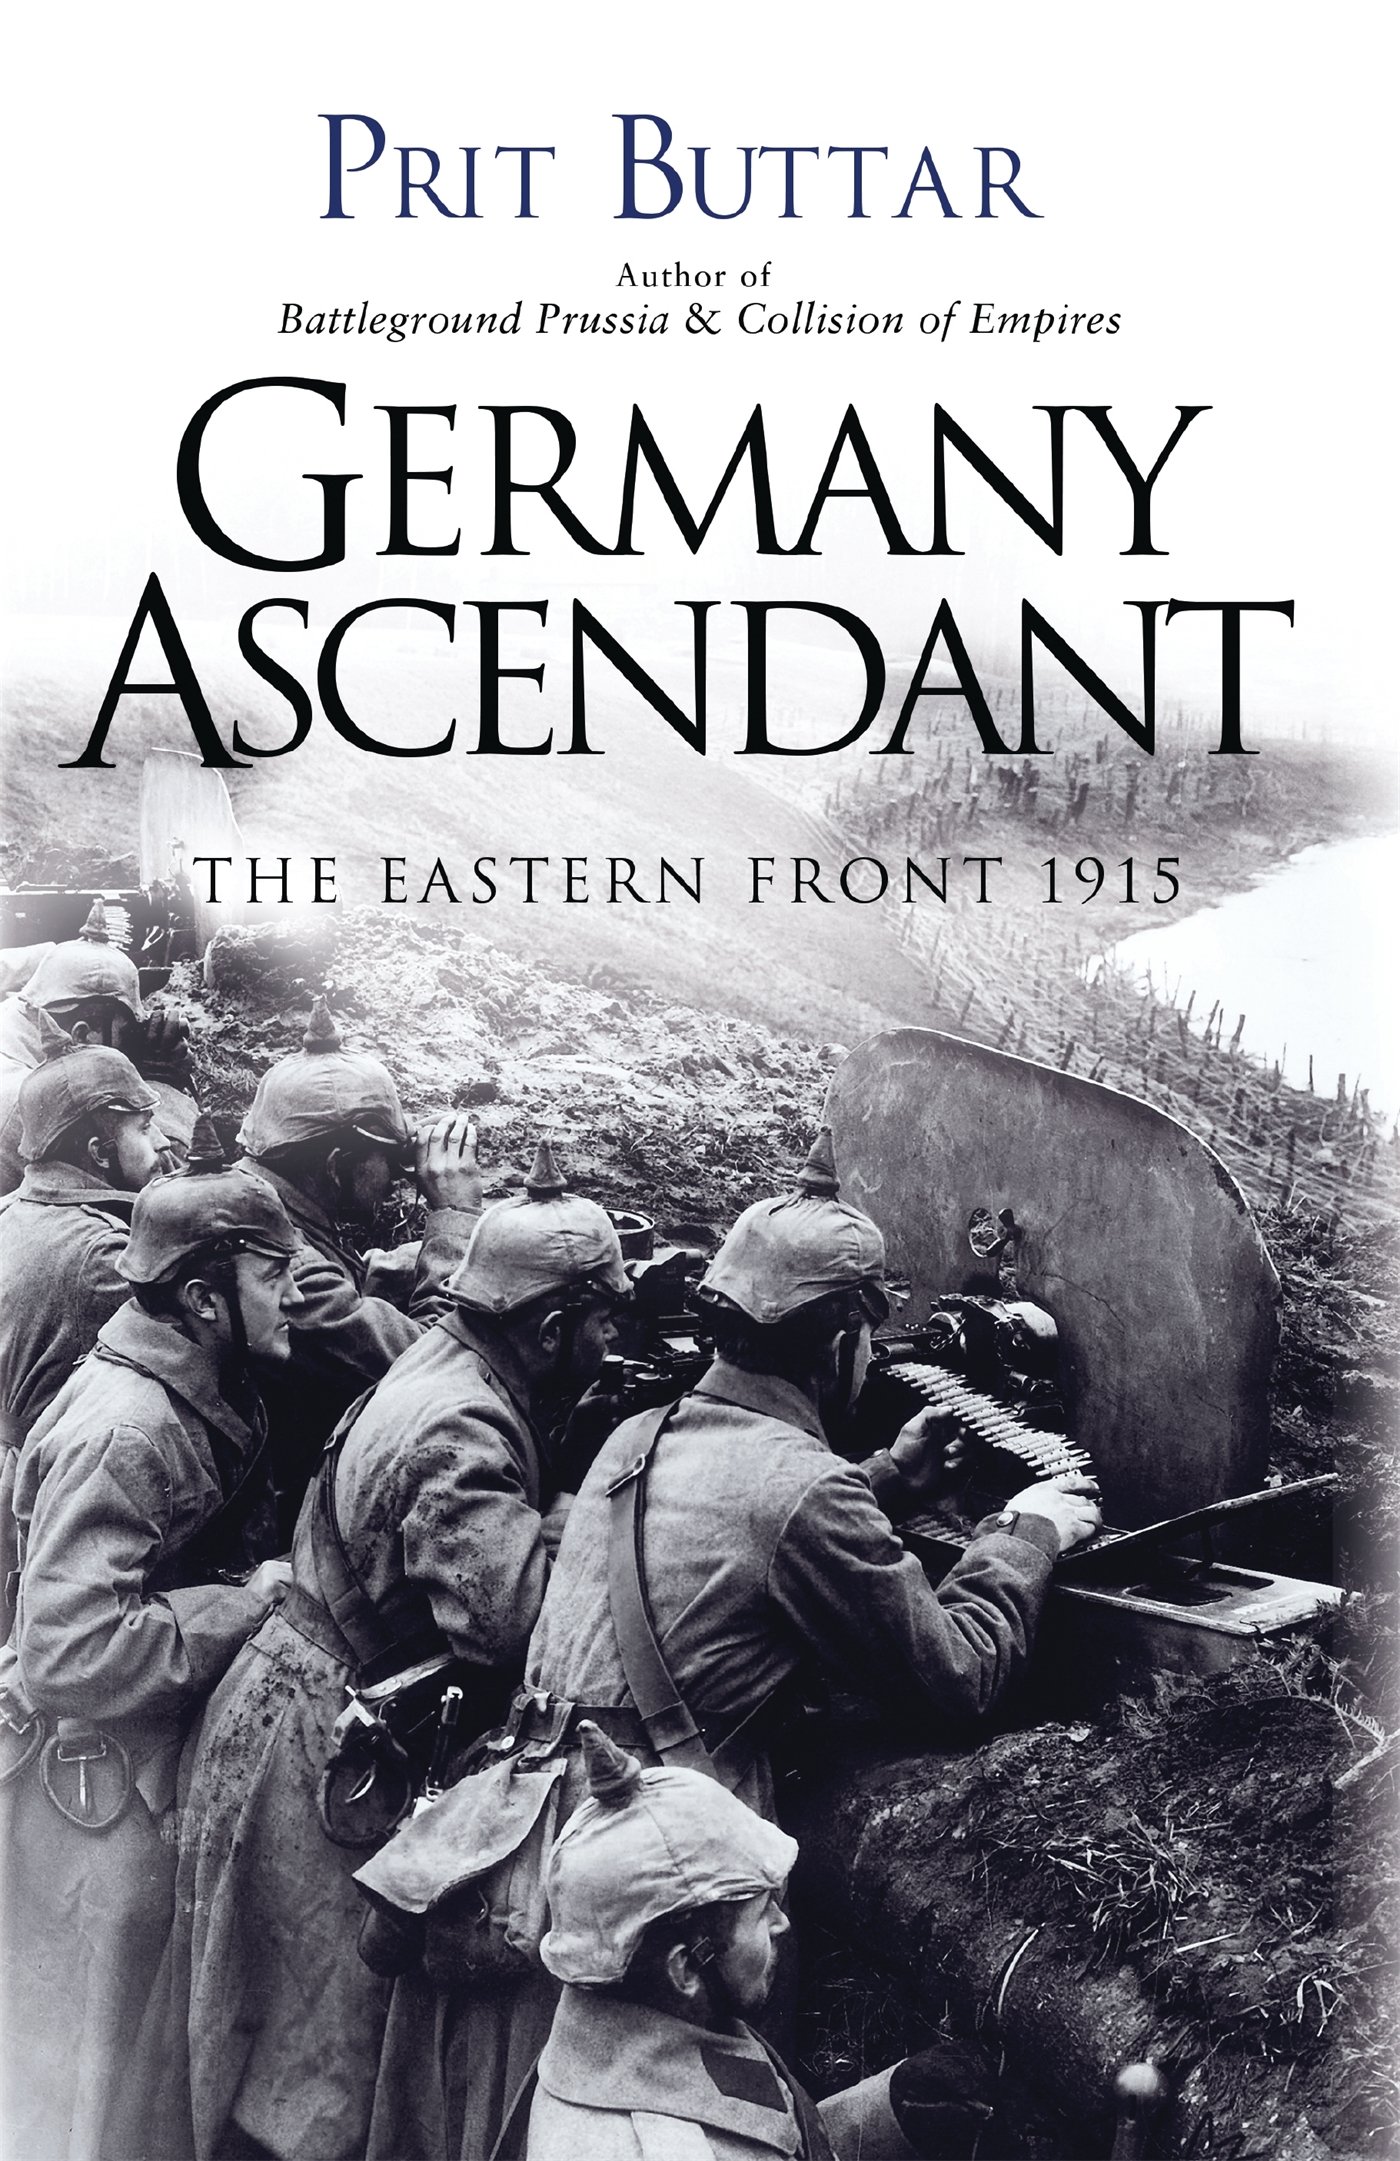 Germany Ascendant - The Eastern Front 1915 | Prit Buttar